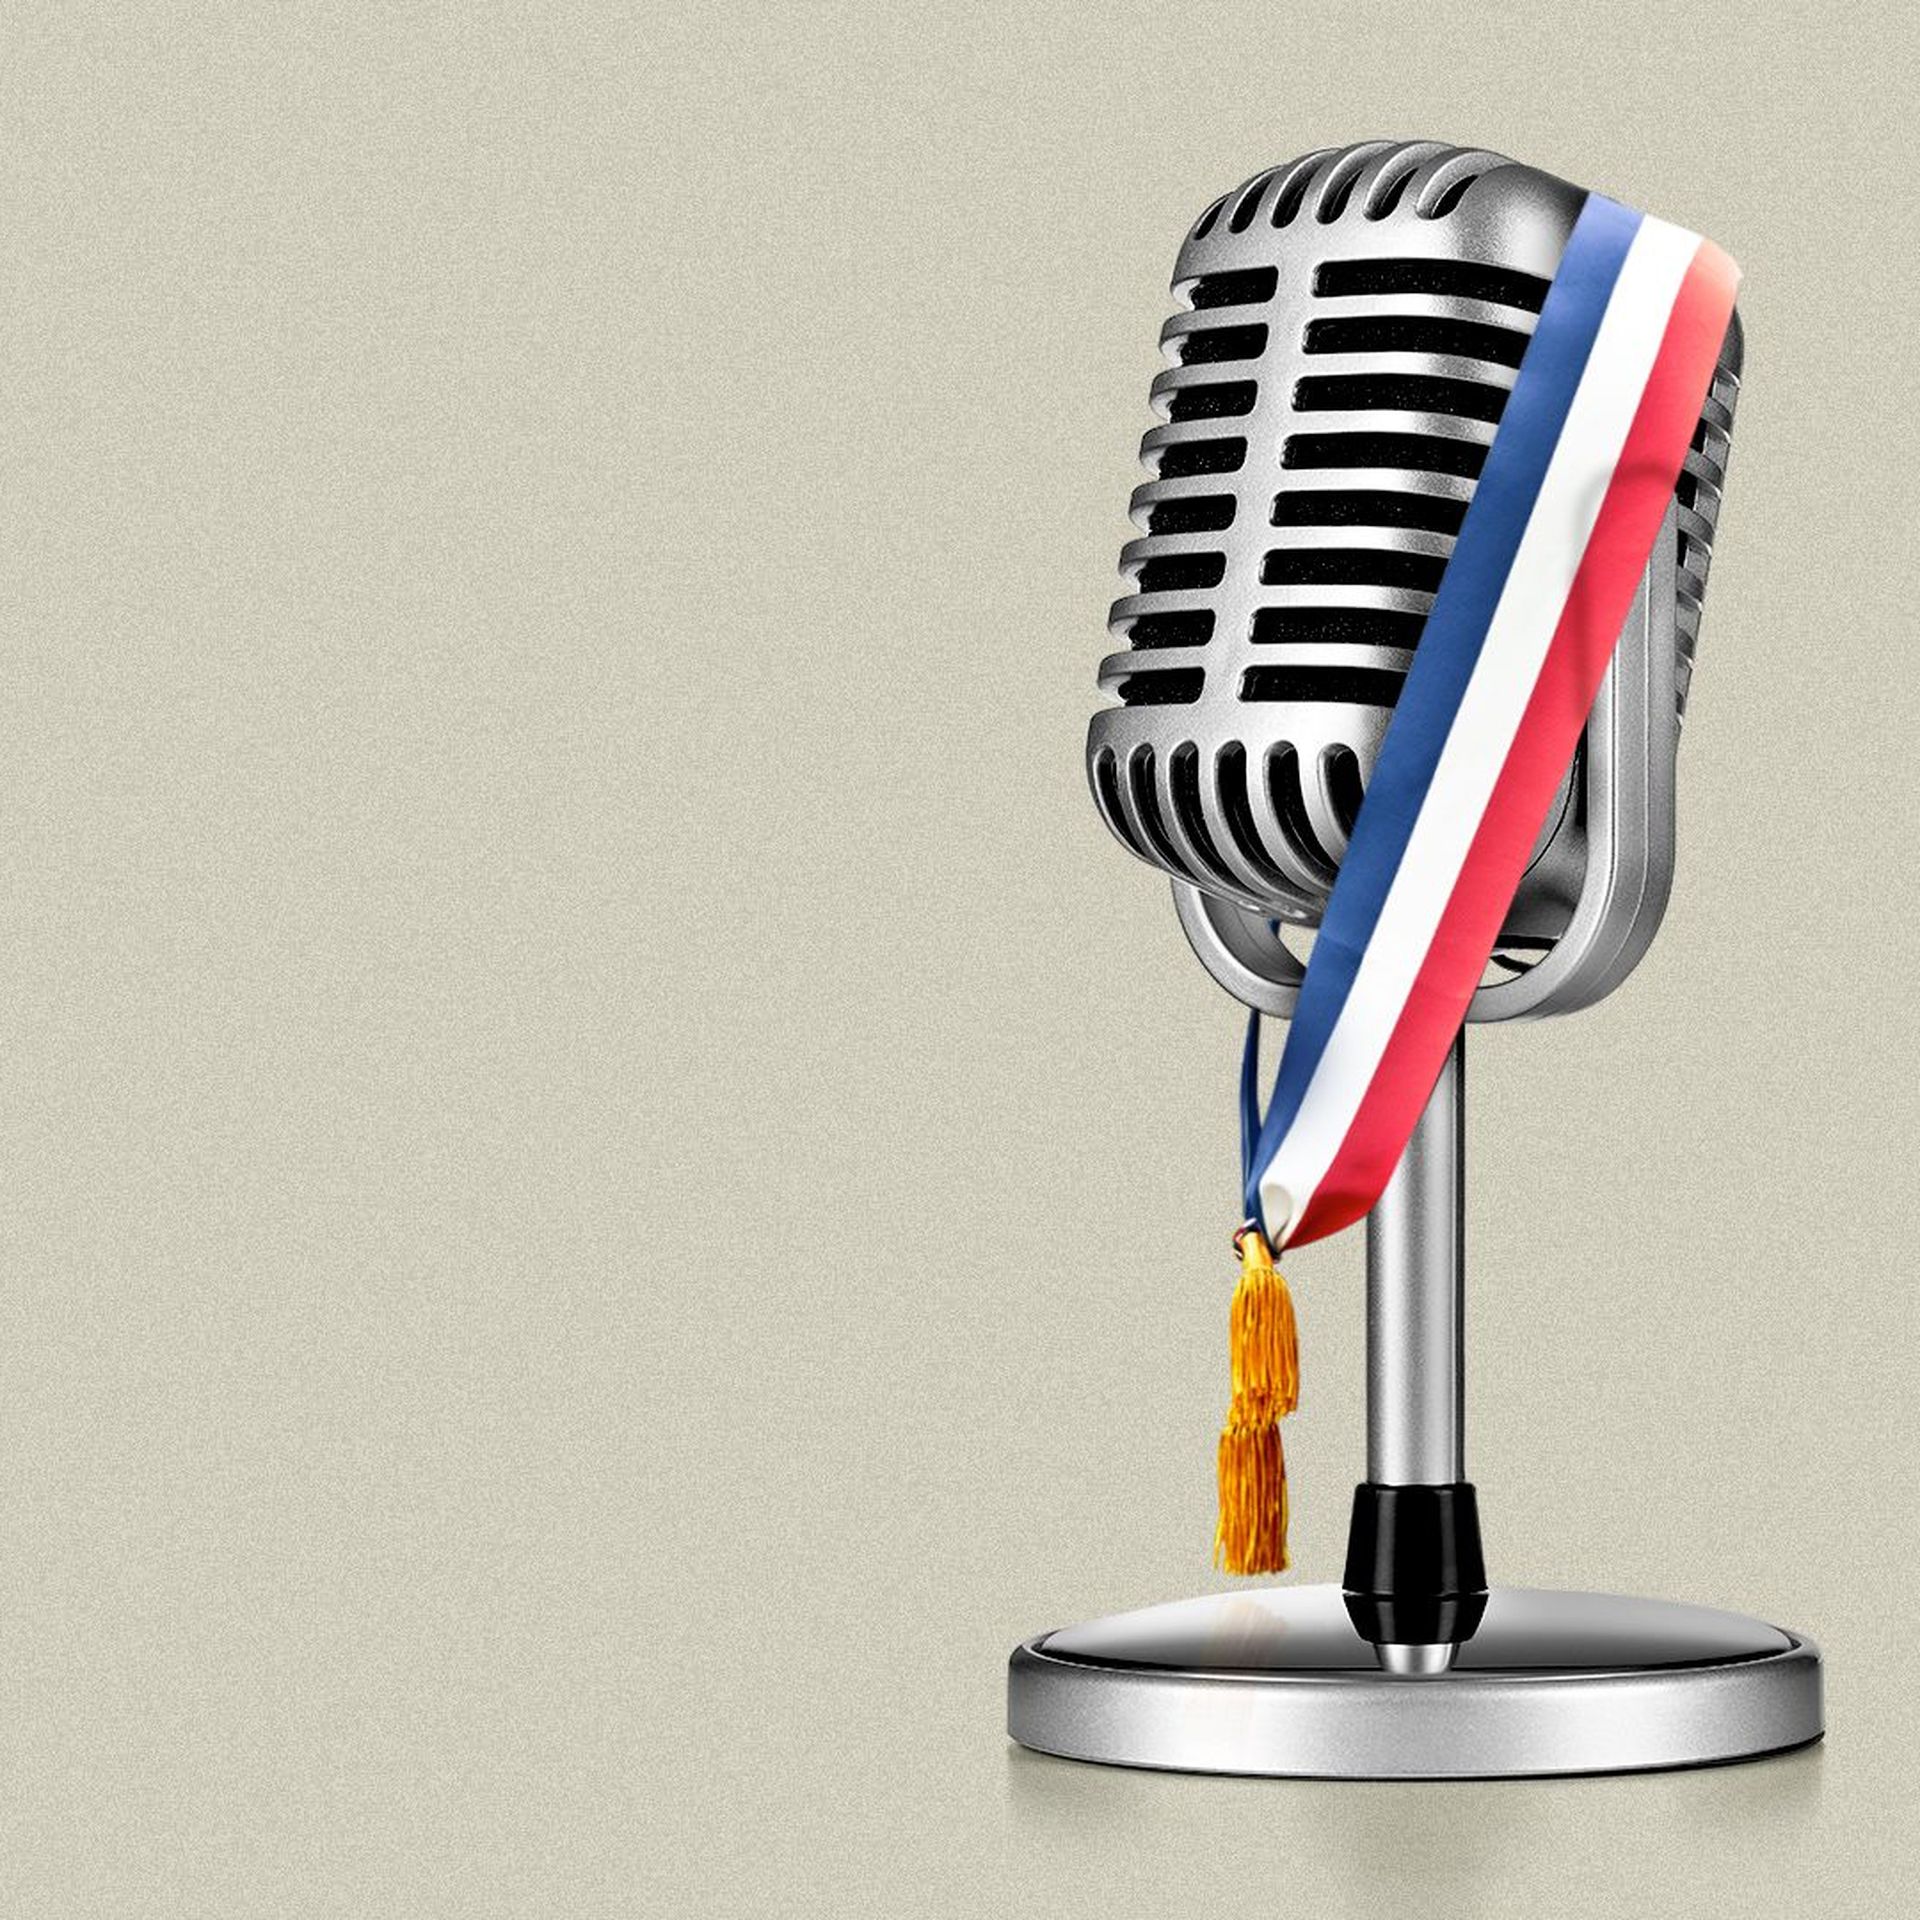 Illustration of a microphone wearing a mayoral sash. 